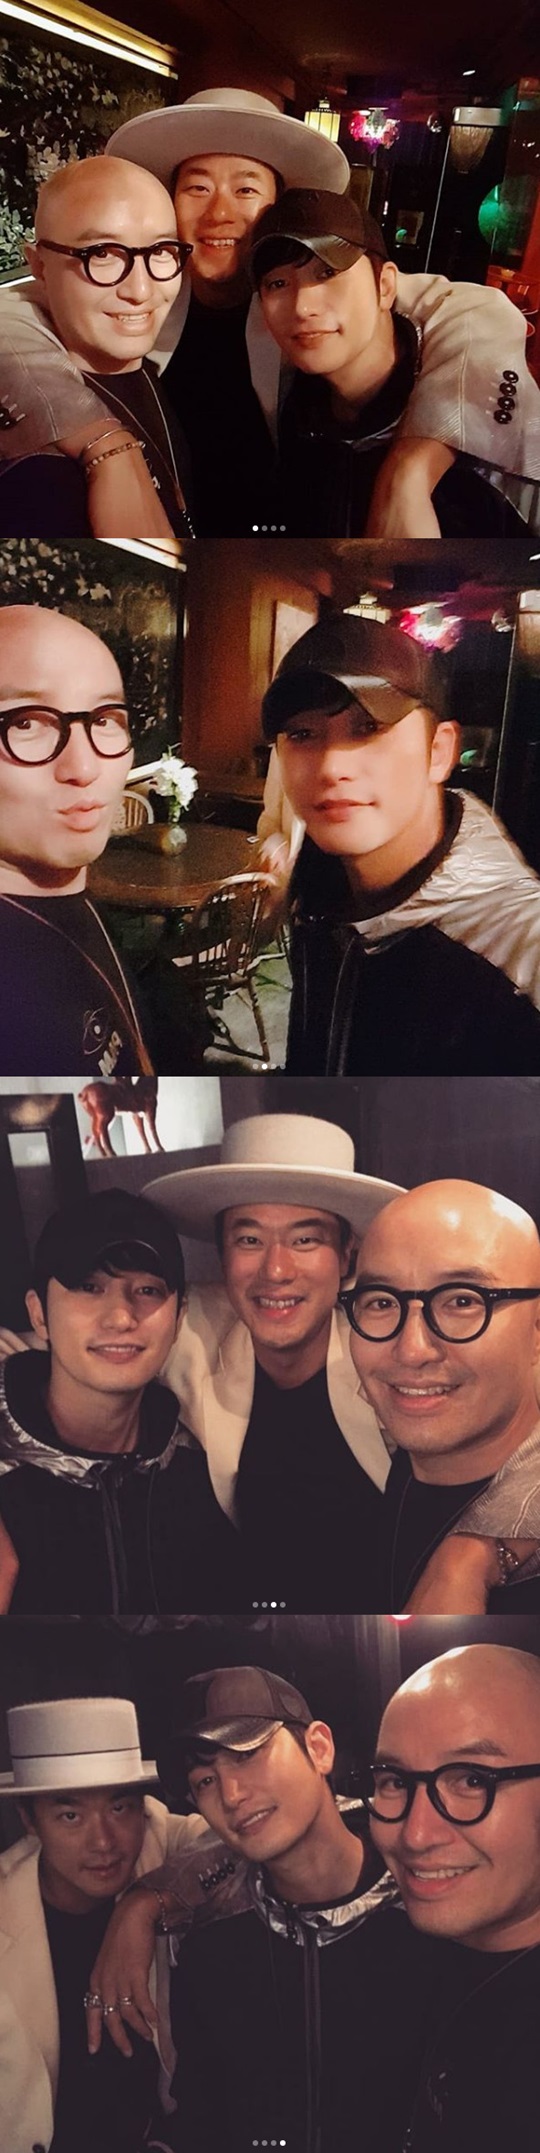 Broadcaster Hong Seok-cheon has announced the latest situation of actor Park Si-hoo.Hong Seok-cheon released a certification shot with Park Si-hoo, writer Kim and Jun-Hyung who visited his store on personal SNS on the 28th.In the open photo, Park Si-hoo is wearing a black cap cap and comfortable clothes, while Kim and Jun-Hyung are dressed in white brim hats and white suits.Hong Seok-cheon is all smiles as if their visit is welcome.In addition, Hong Seok-cheon said, Park Si-hoo preparing a new drama; his younger brother Kim, Jun-Hyung, giving a new pleasure.Three men talk a long time? Just a pleasant one. Dont eat the heat after the shooting this summer.The two brothers who have known since their early 20s are now worried about each other. Meanwhile, Park Si-hoo is considering appearing in KBS2s new drama Lovely Horrible (playplayplayed by Park Min-joo and directed by Kang Min-kyung).